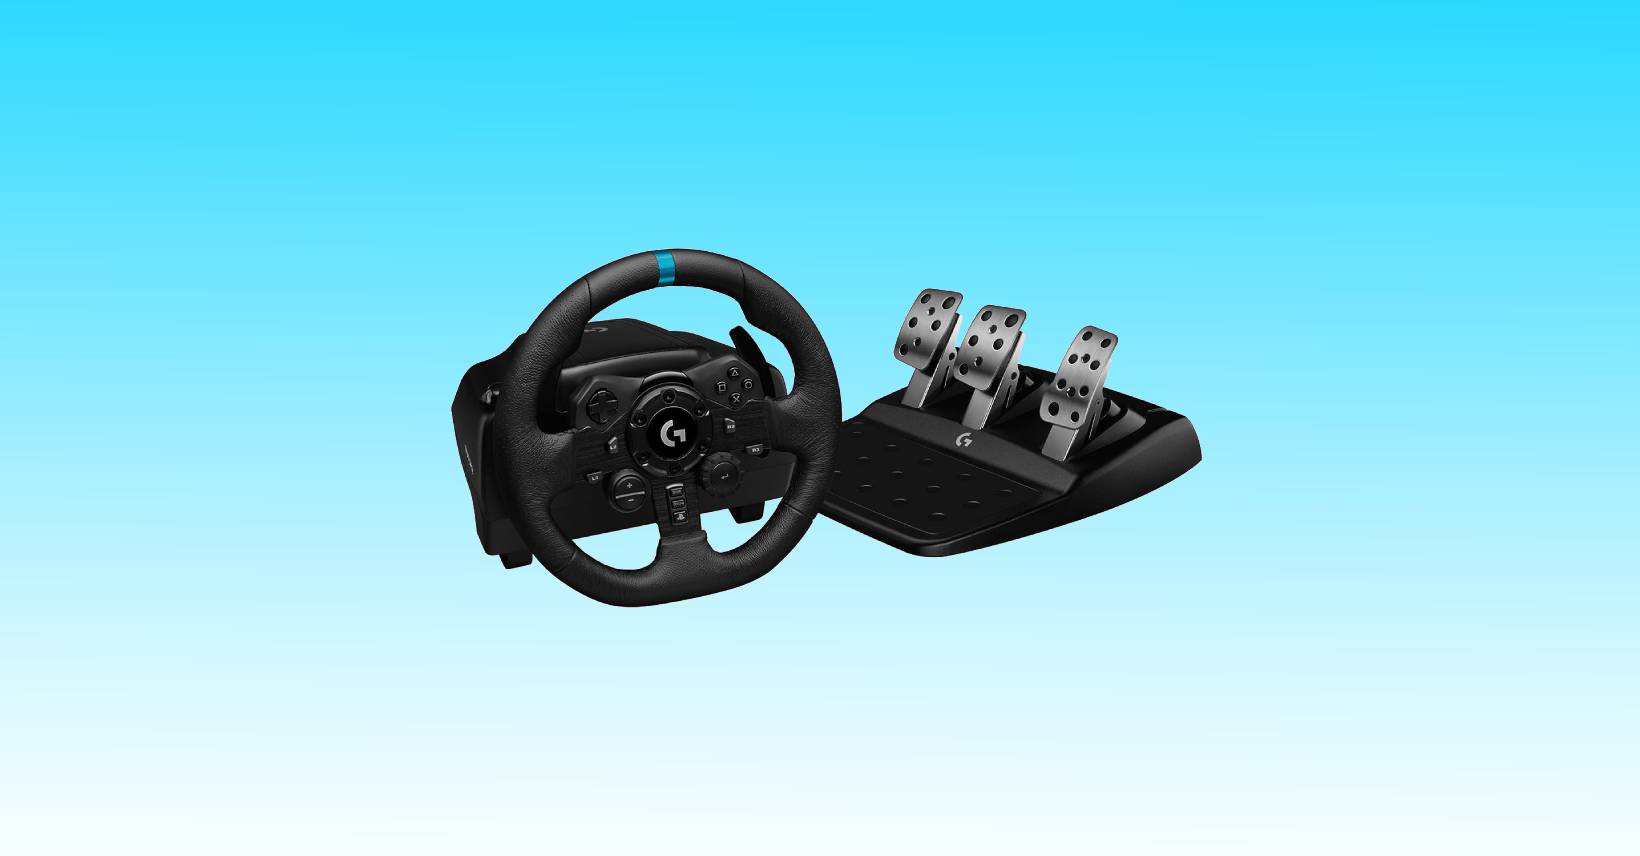 Black Friday deal on the Logitech G923 Racing Wheel and Pedals